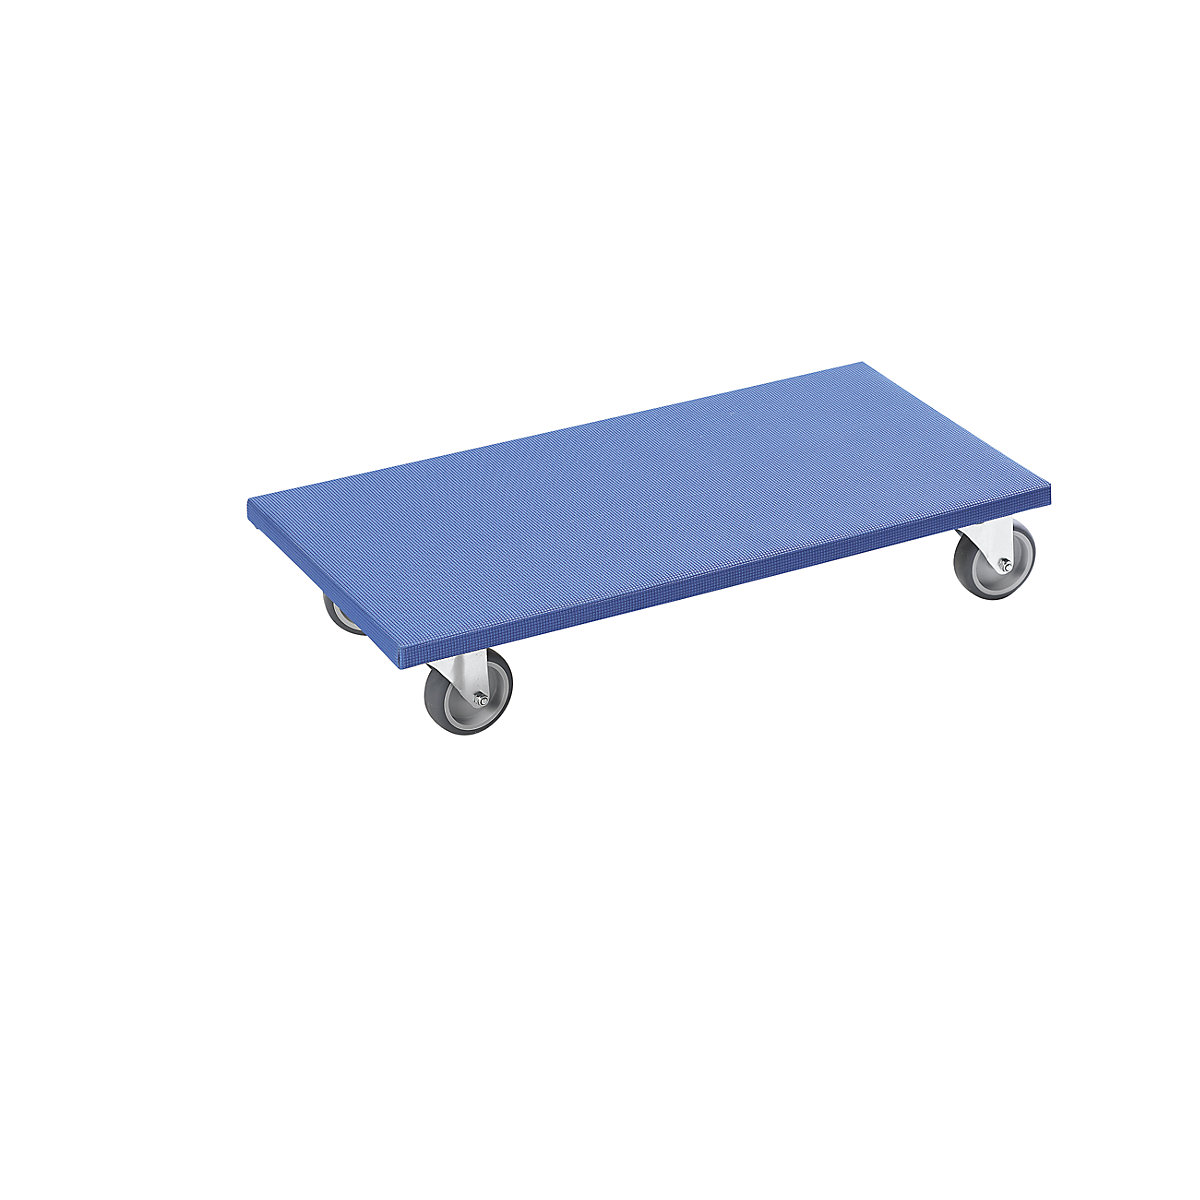 Furniture dolly, LxWxH 600 x 300 x 120 mm, pack of 2, 5+ packs-1